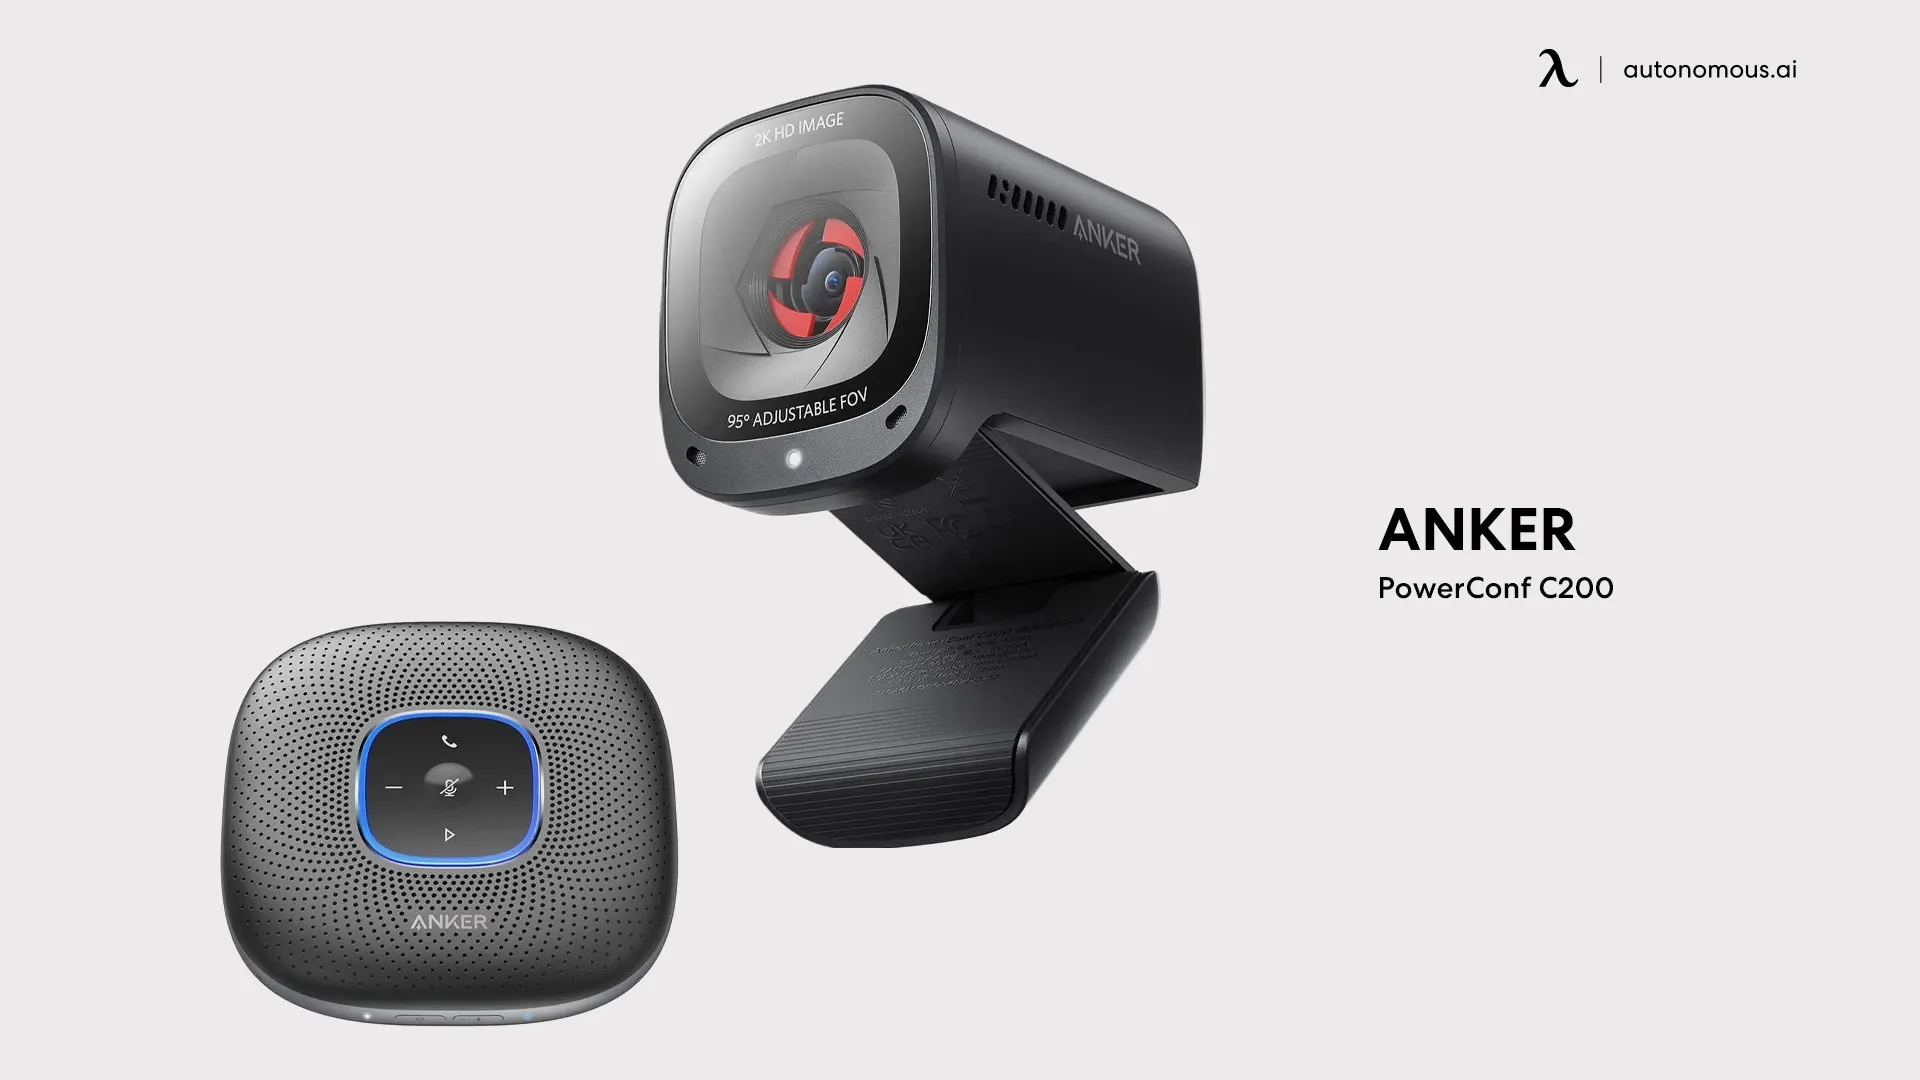 Anker PowerConf C200 webcam for pc